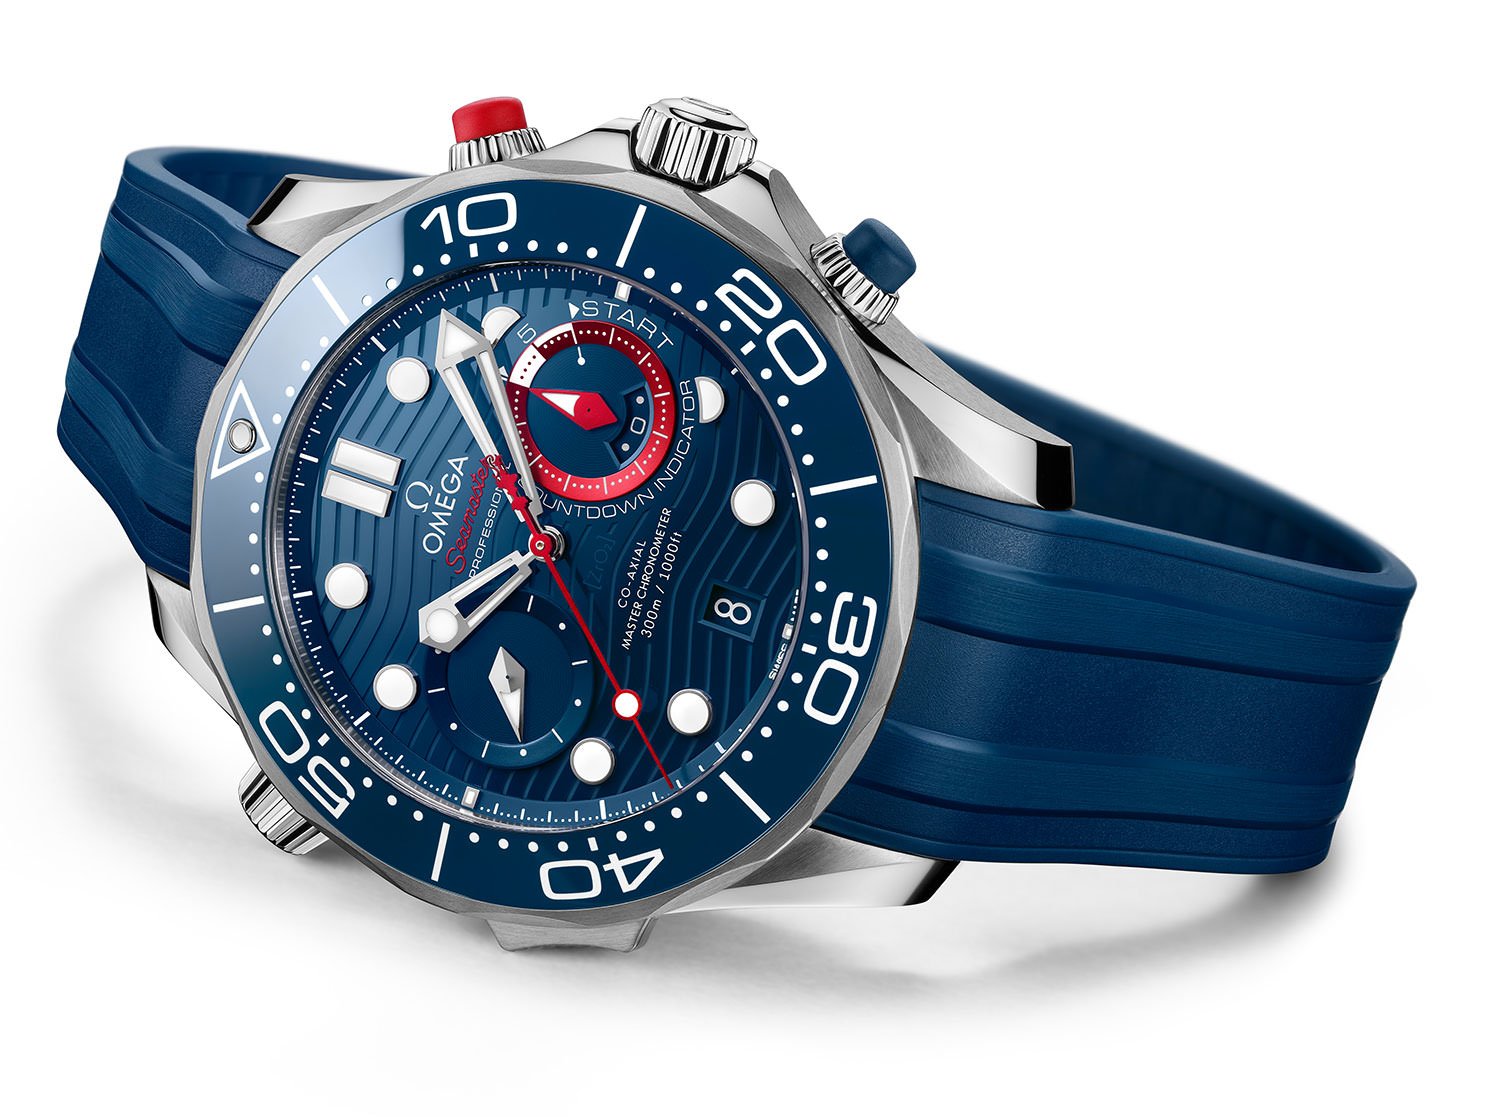 OMEGA Seamaster Diver 300M America’s Cup Chronograph 210.30.44.51.03.002